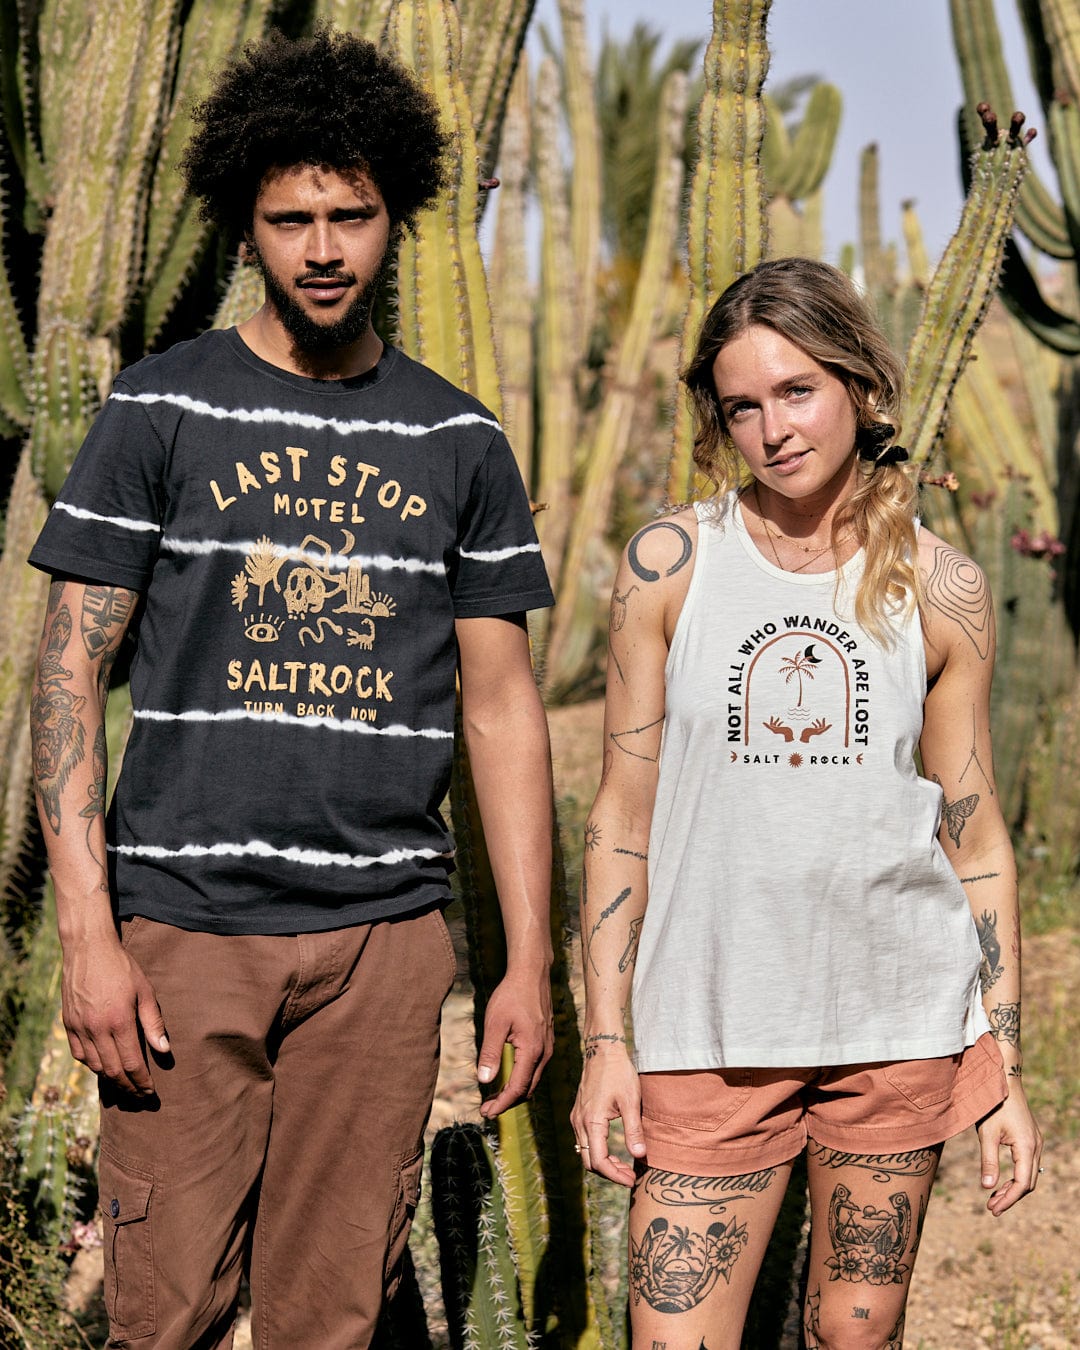 A man and a woman standing in a desert landscape, both wearing Saltrock Palmera - Womens Vest - White outfits made of 100% cotton and surrounded by tall cacti.